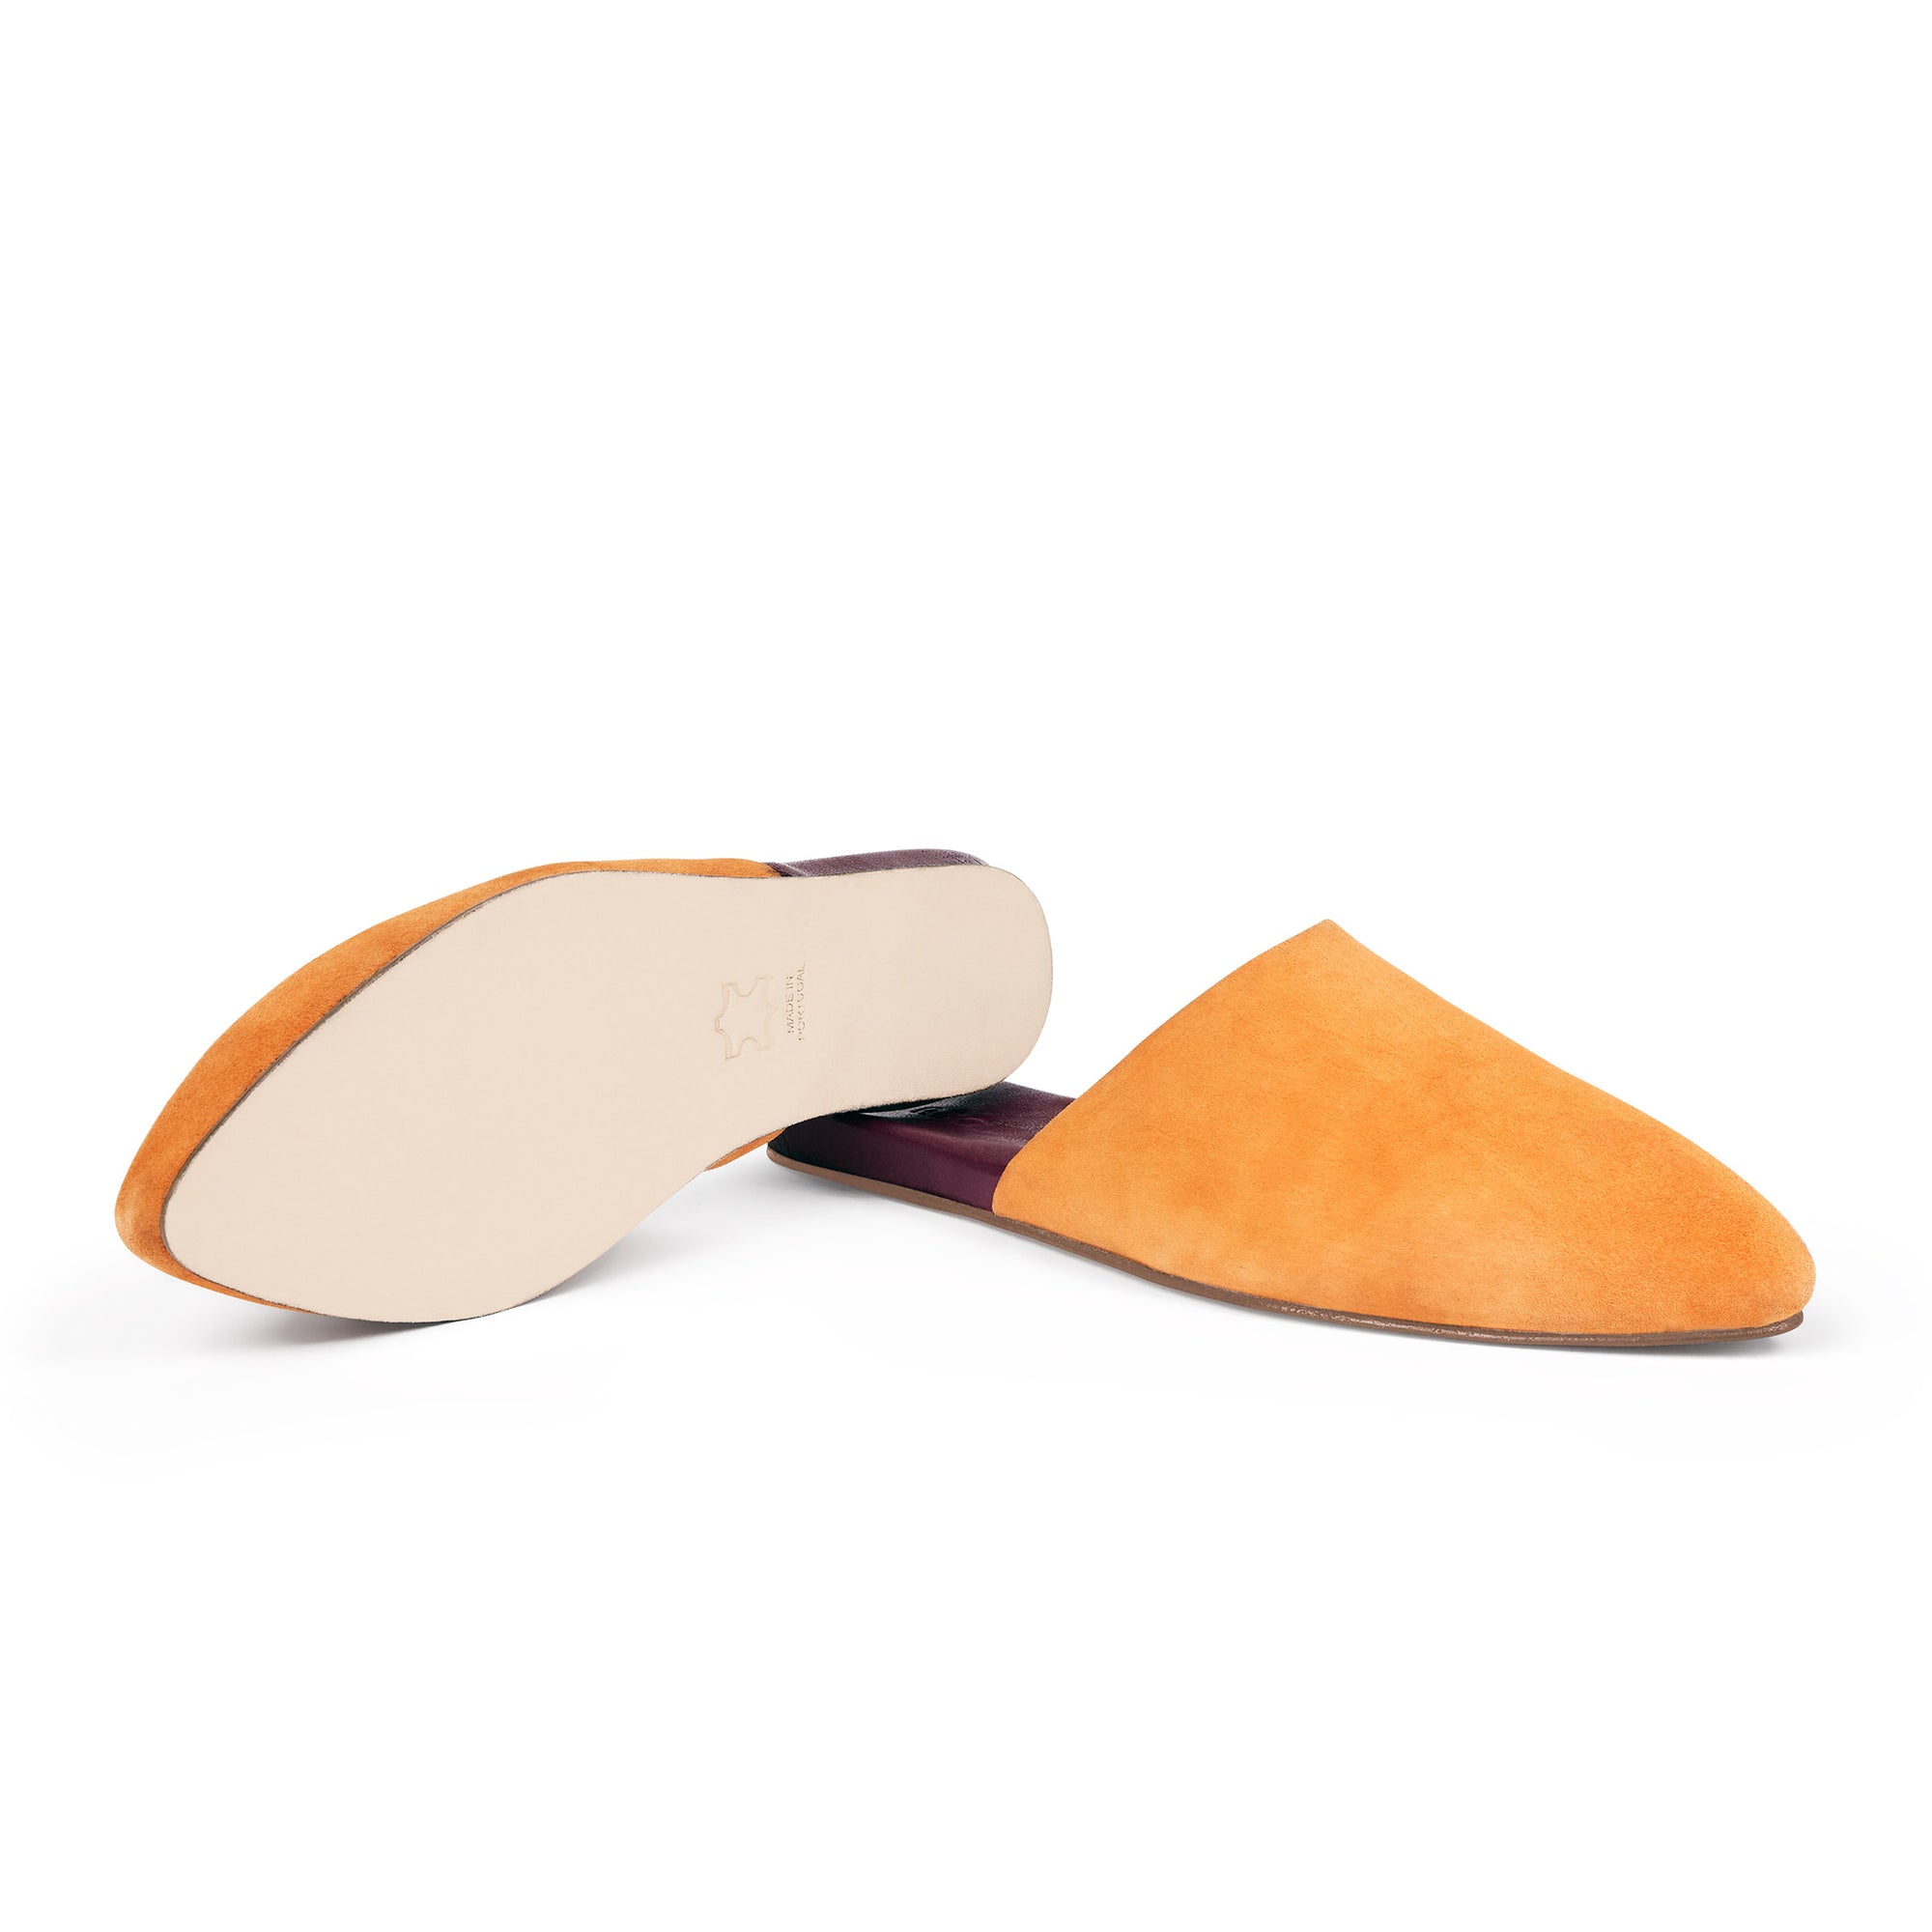 Inabo Women's Slider slipper in Saffron Suede showing the leather outer sole